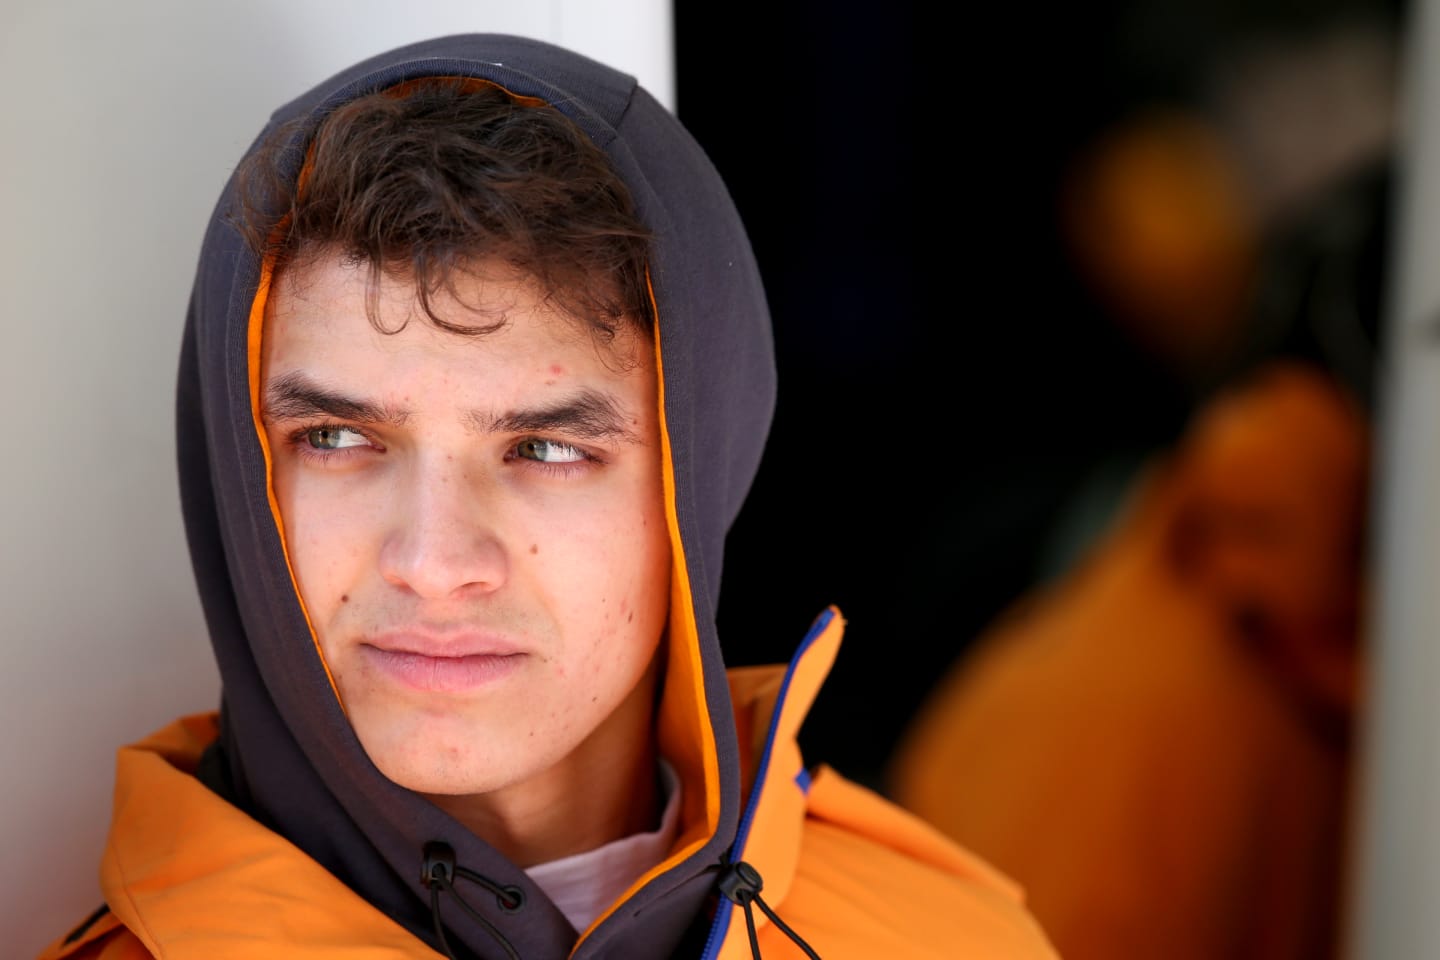 BARCELONA, SPAIN - FEBRUARY 26: Lando Norris of Great Britain and McLaren F1 looks on in the